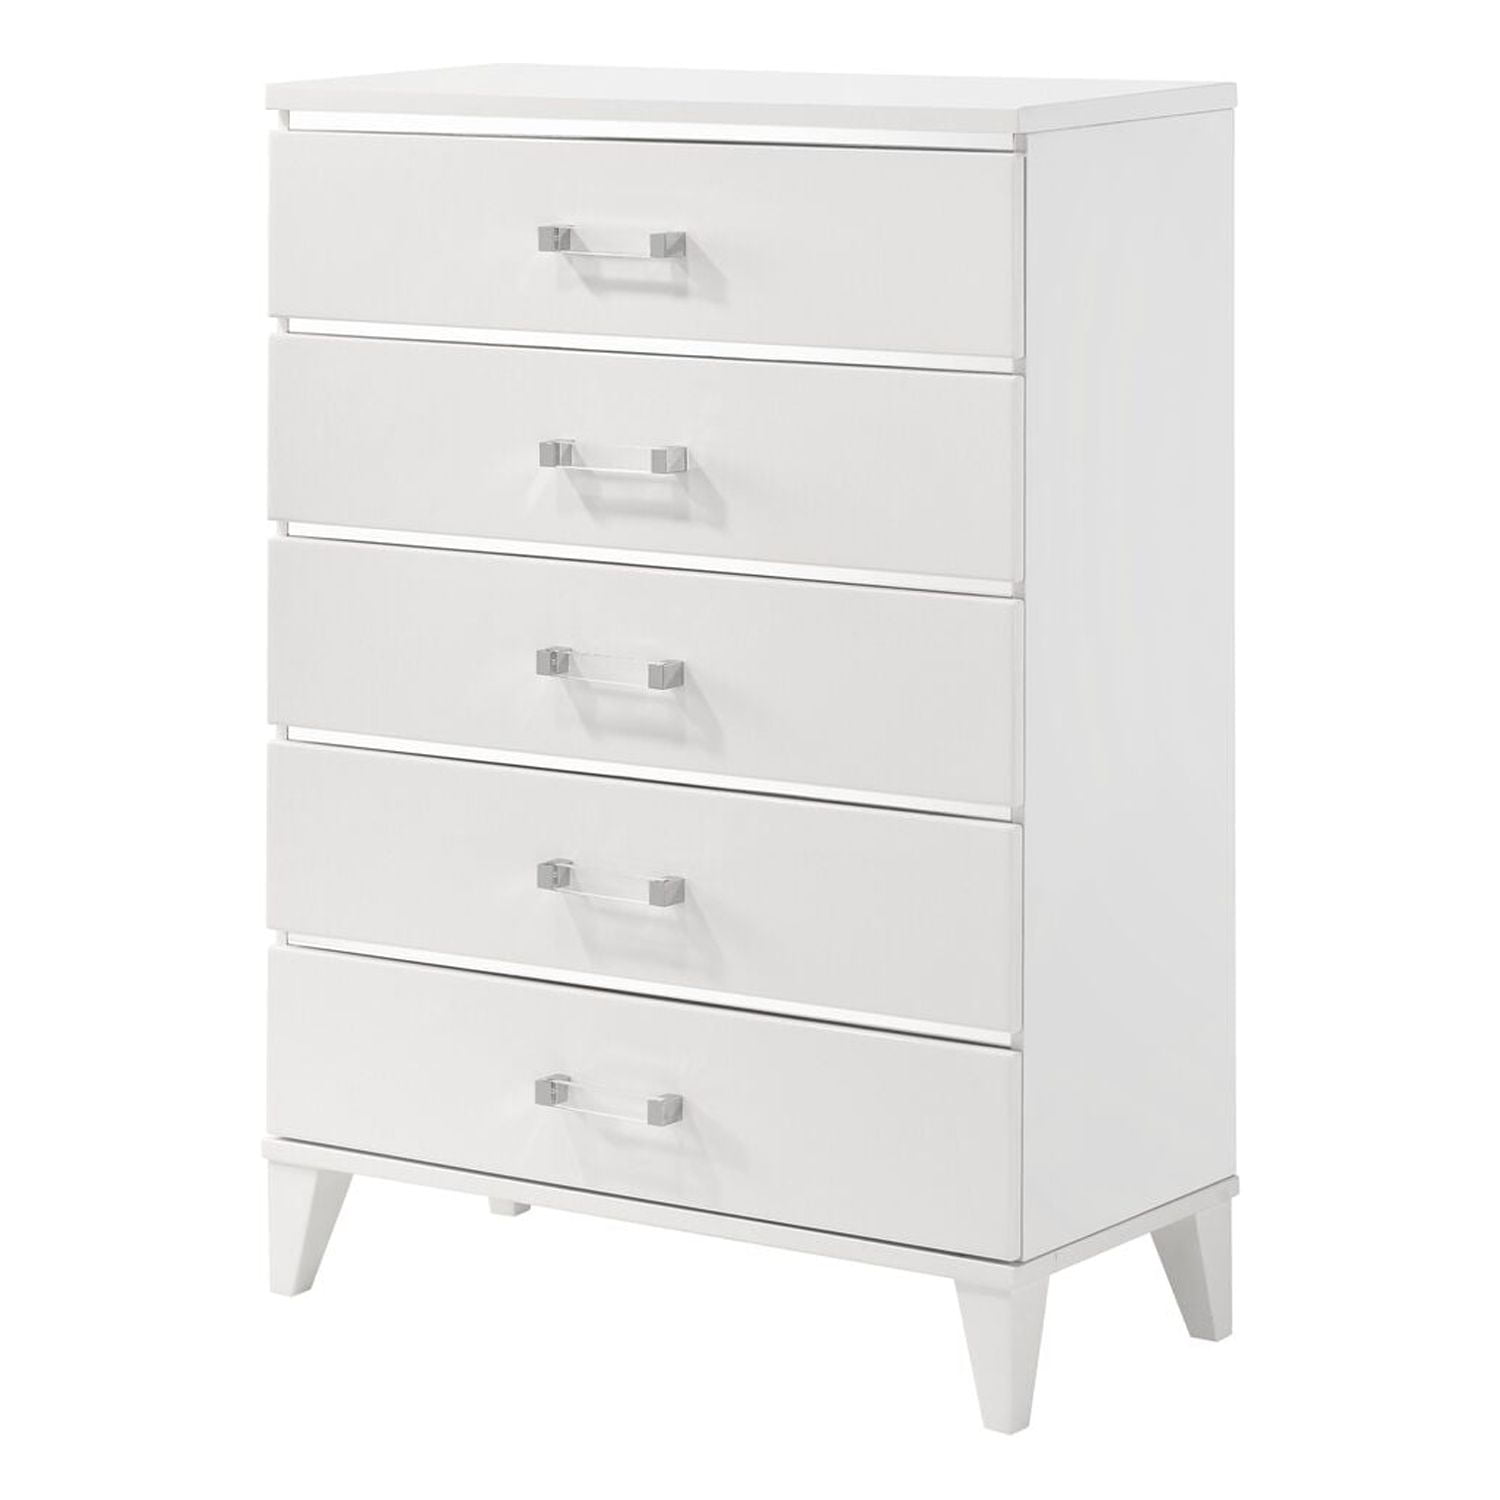 Picture of Acme Furniture 27396 35 x 16 x 49 in. Chelsie Chest, White